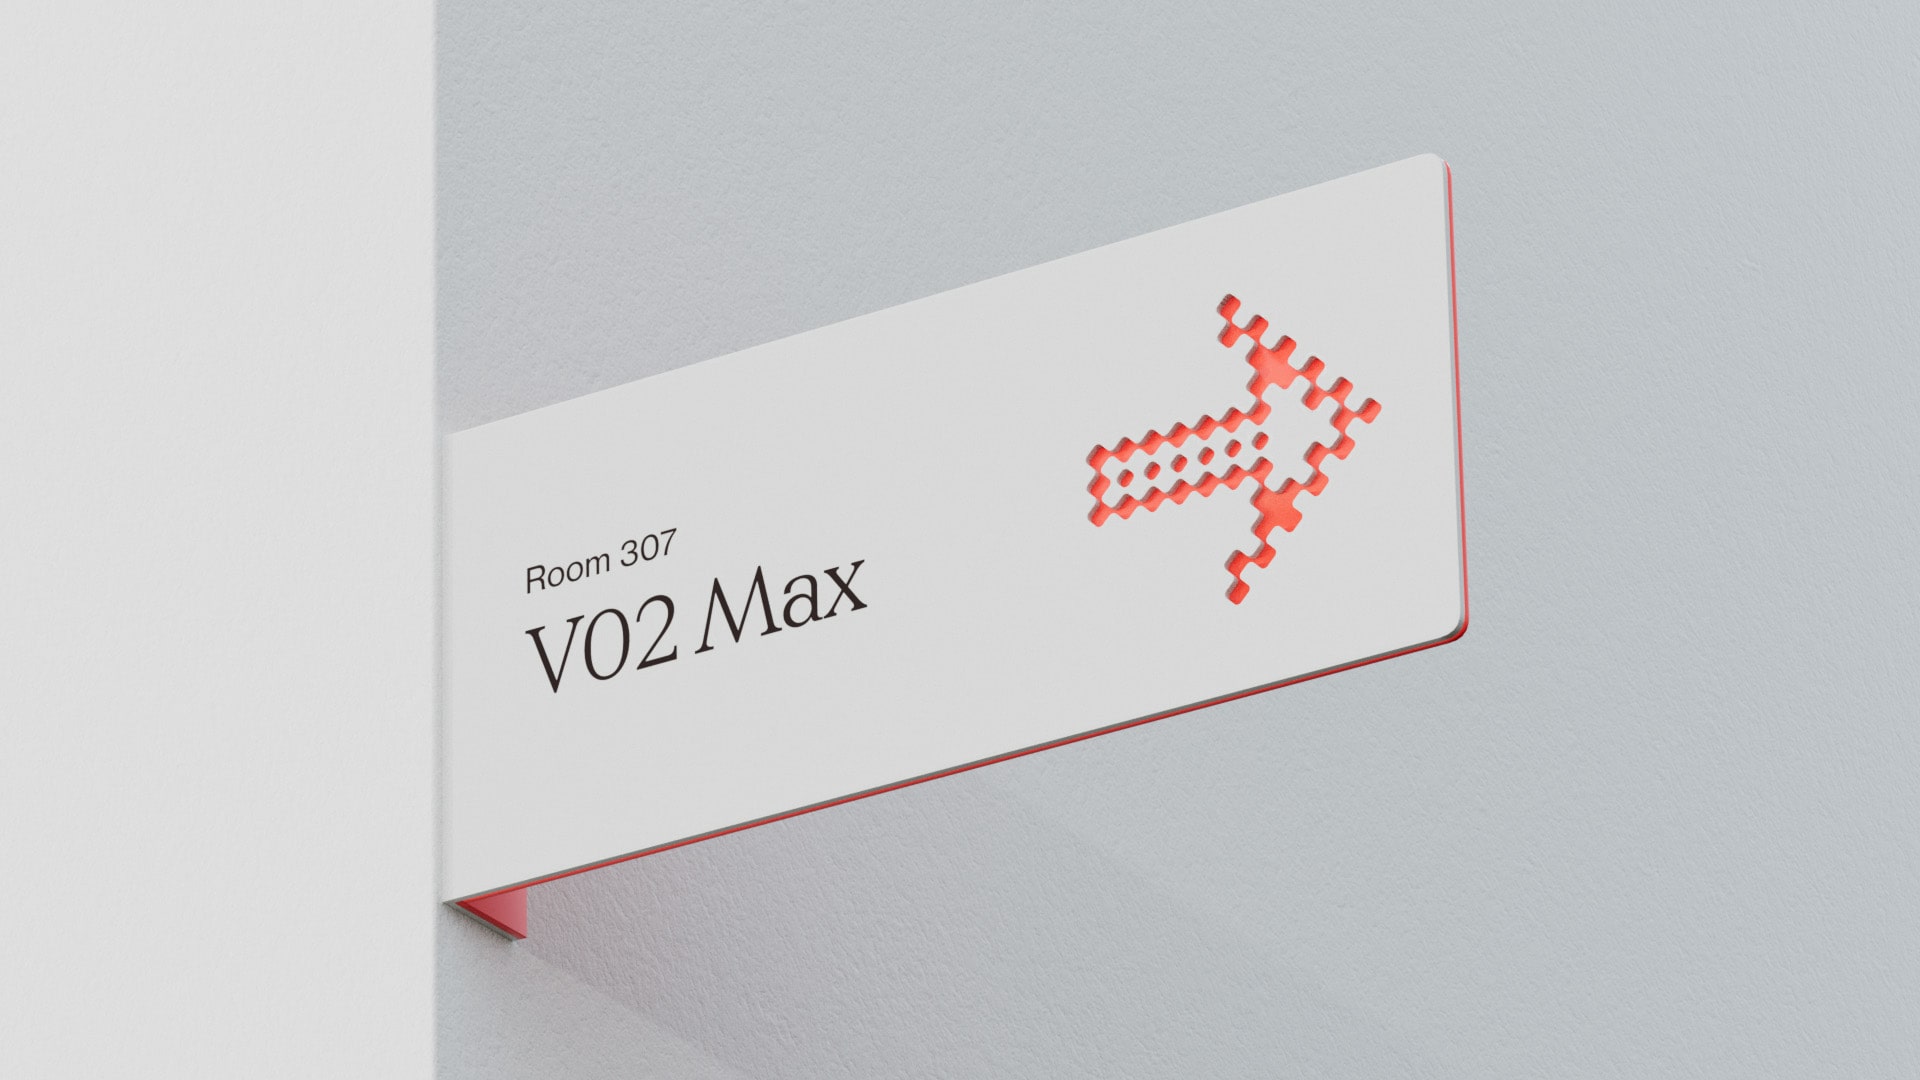 A wall-mounted sign points to the right with a red, pixelated arrow. The sign reads "Room 307 V02 Max" in bold black lettering on a white background. The edges of the sign are accented with a thin red border. The wall is painted a light gray color.